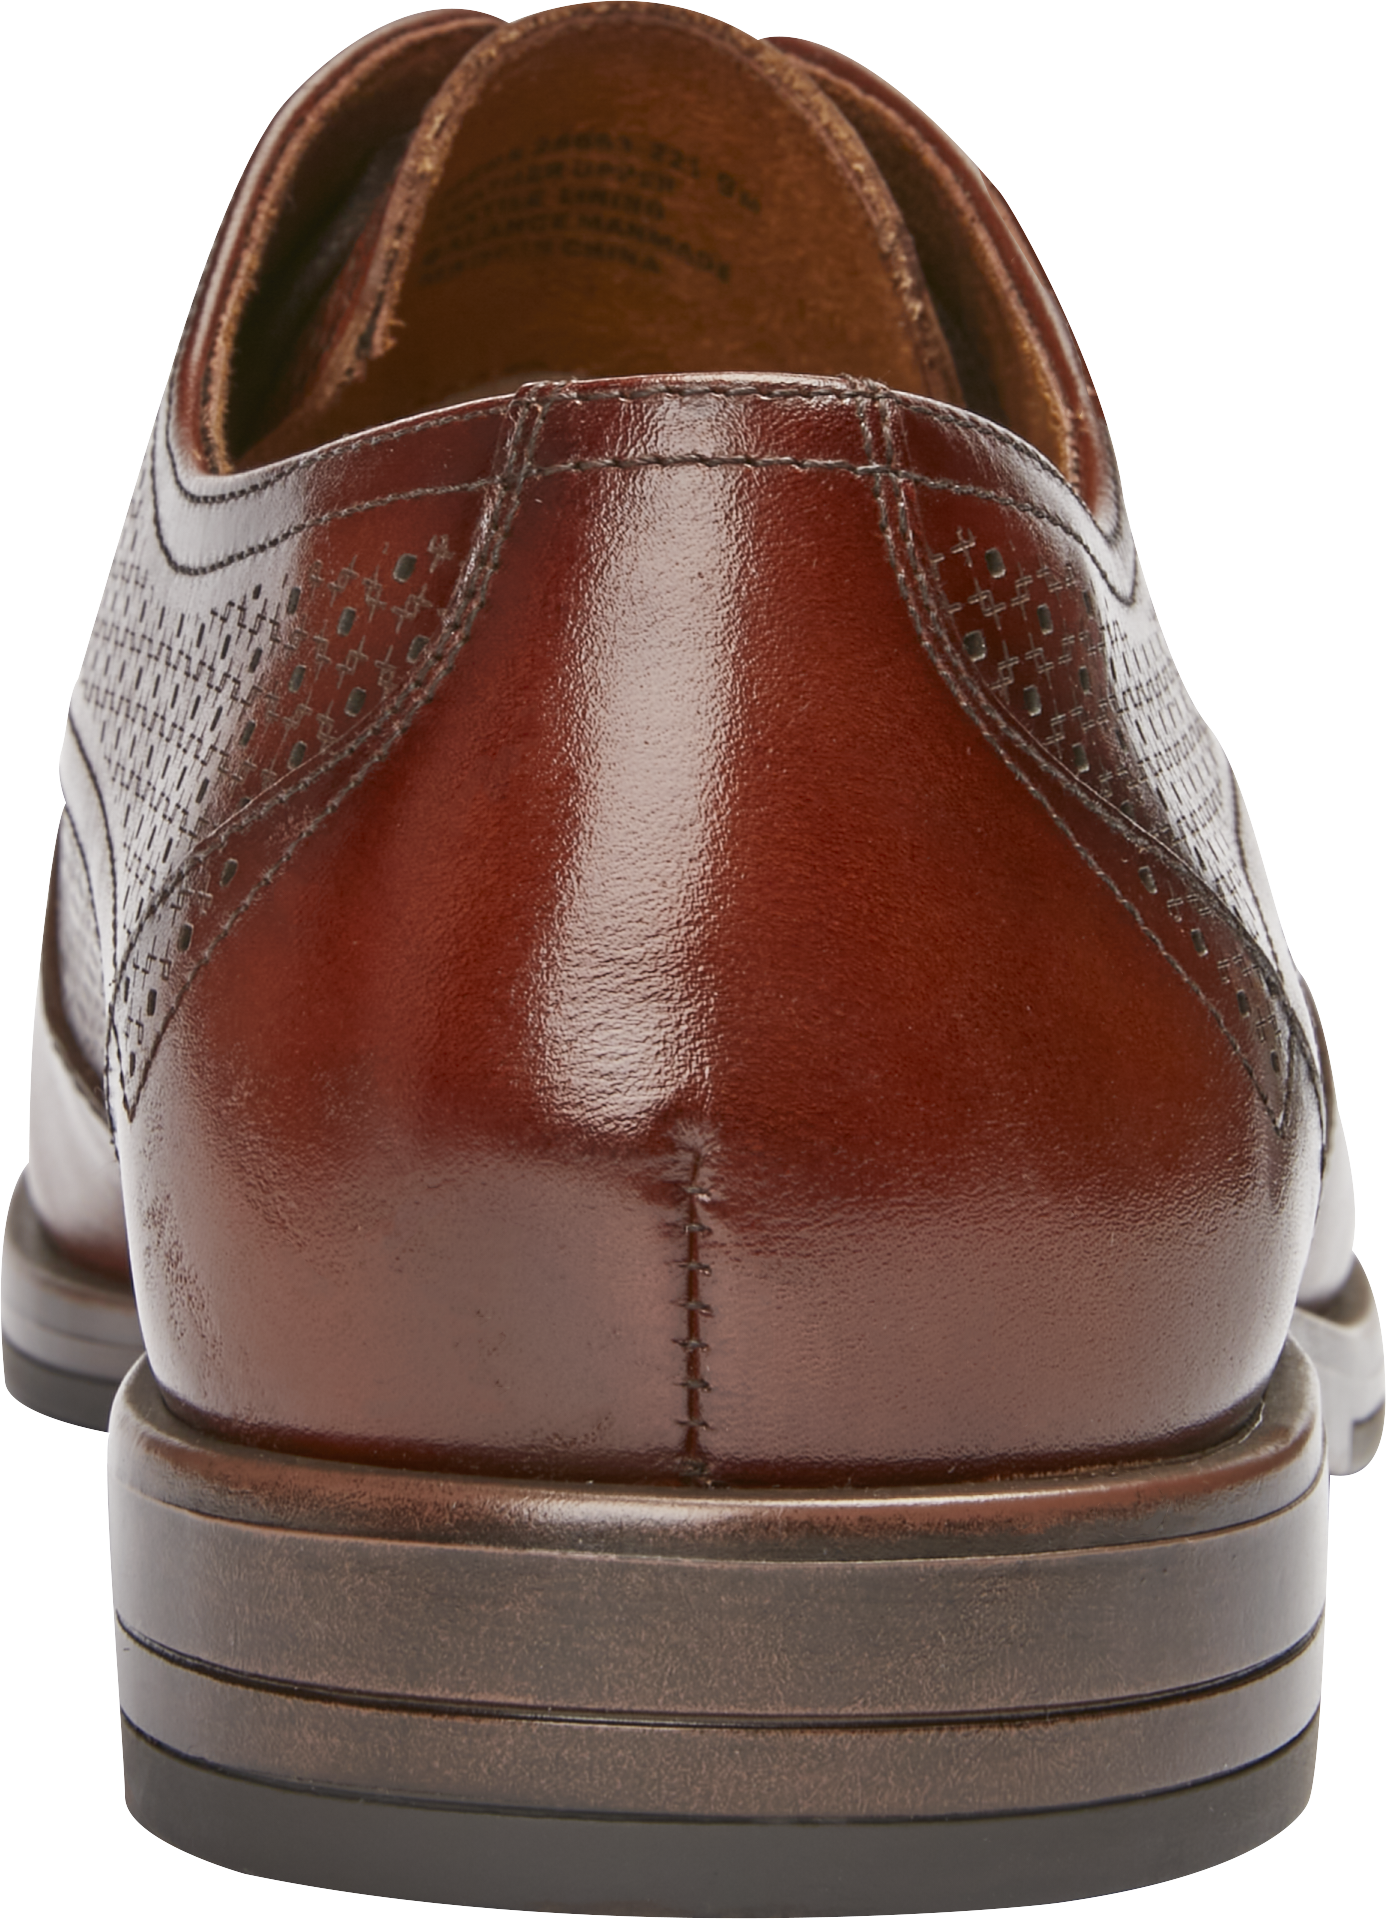 Asher Wingtip Lace-Up Oxfords